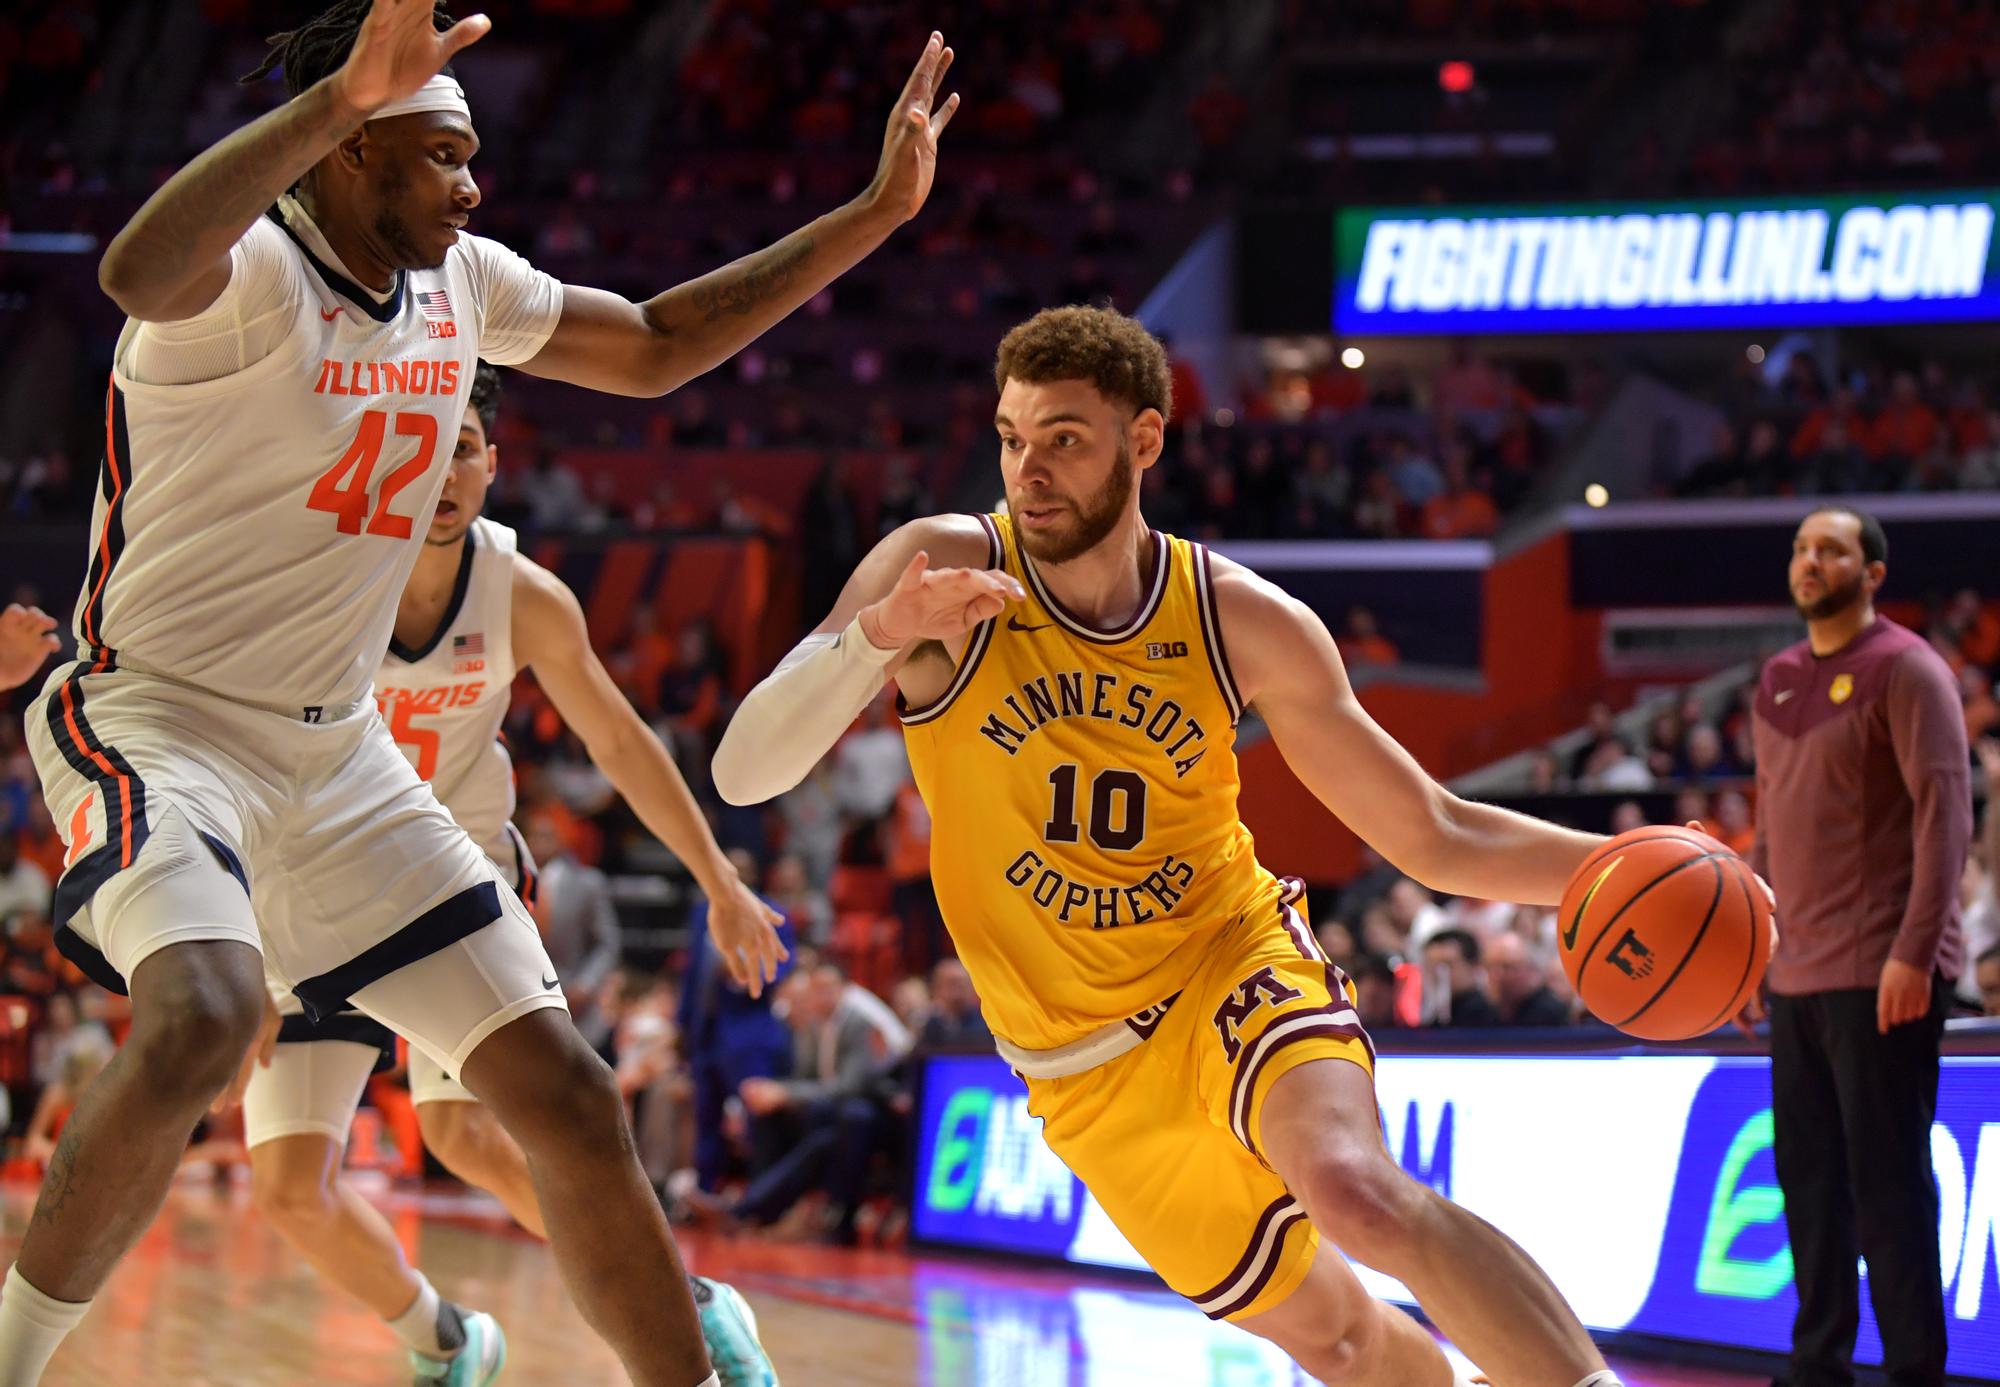 Battle Scores 31 in Loss at Illinois